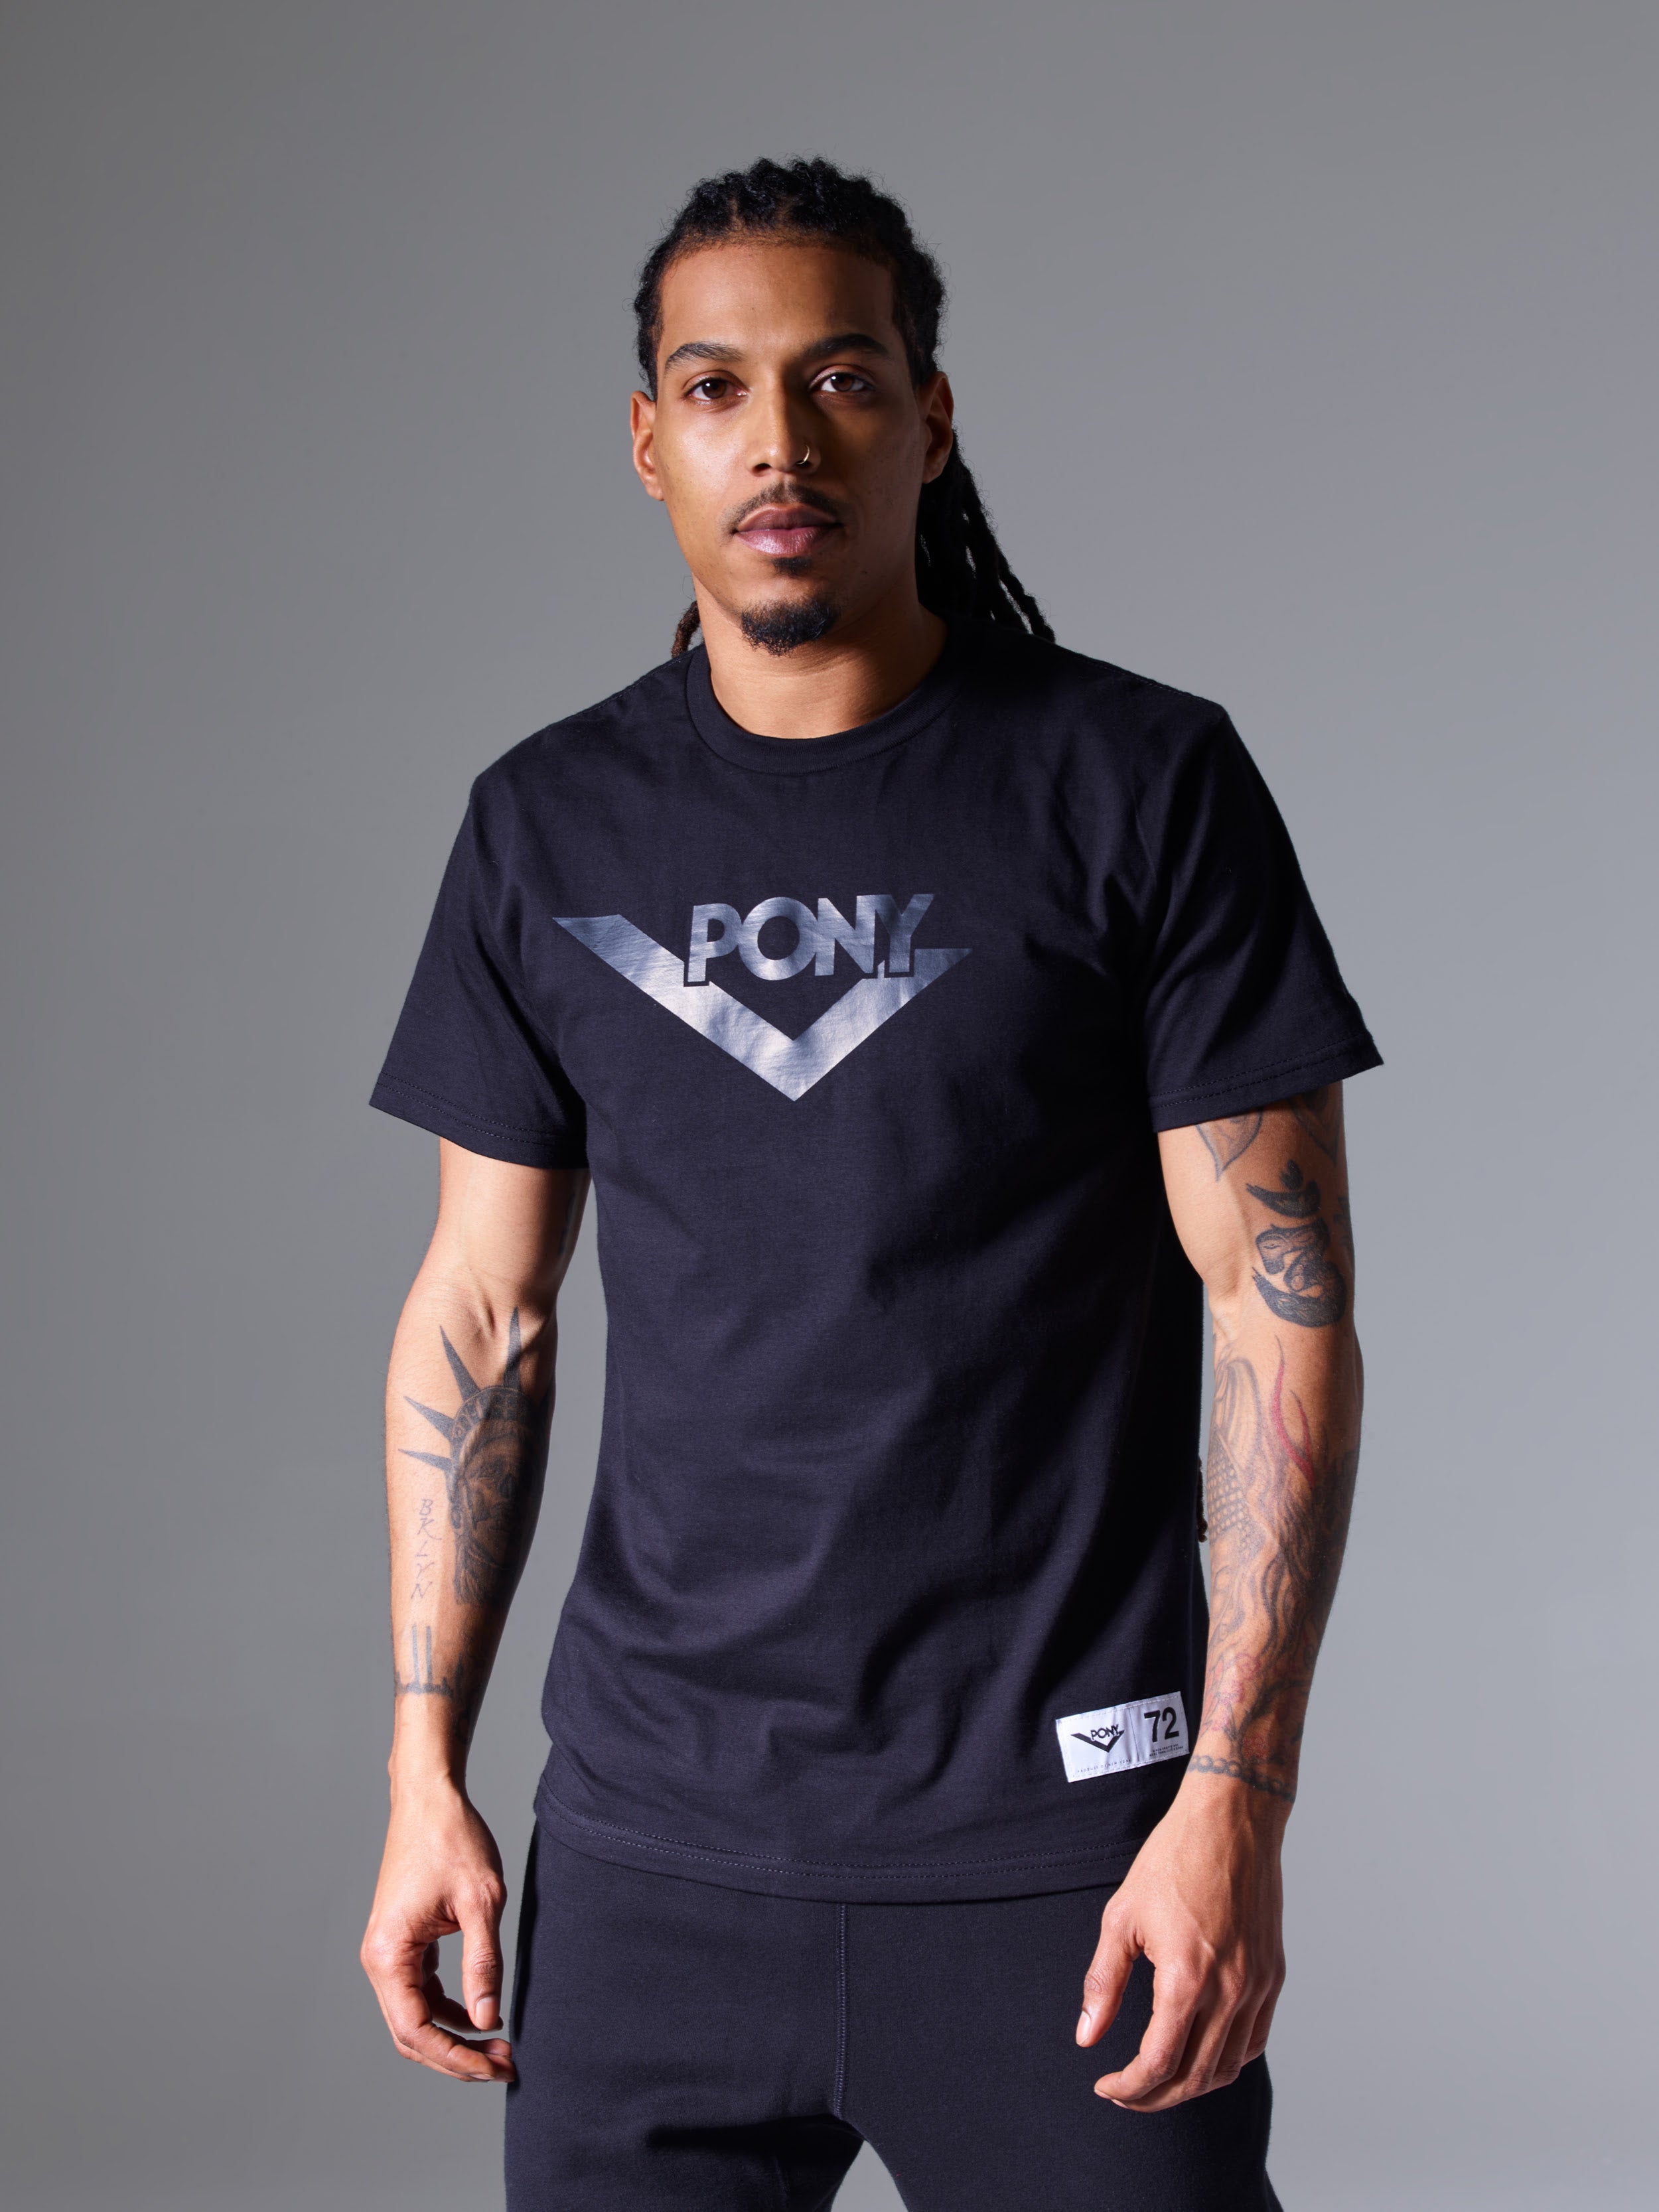 A male model wearing a PONY Classics Lockup vinyl logo t-shirt. A PONY locker label sewn to the lower right of the shirt.